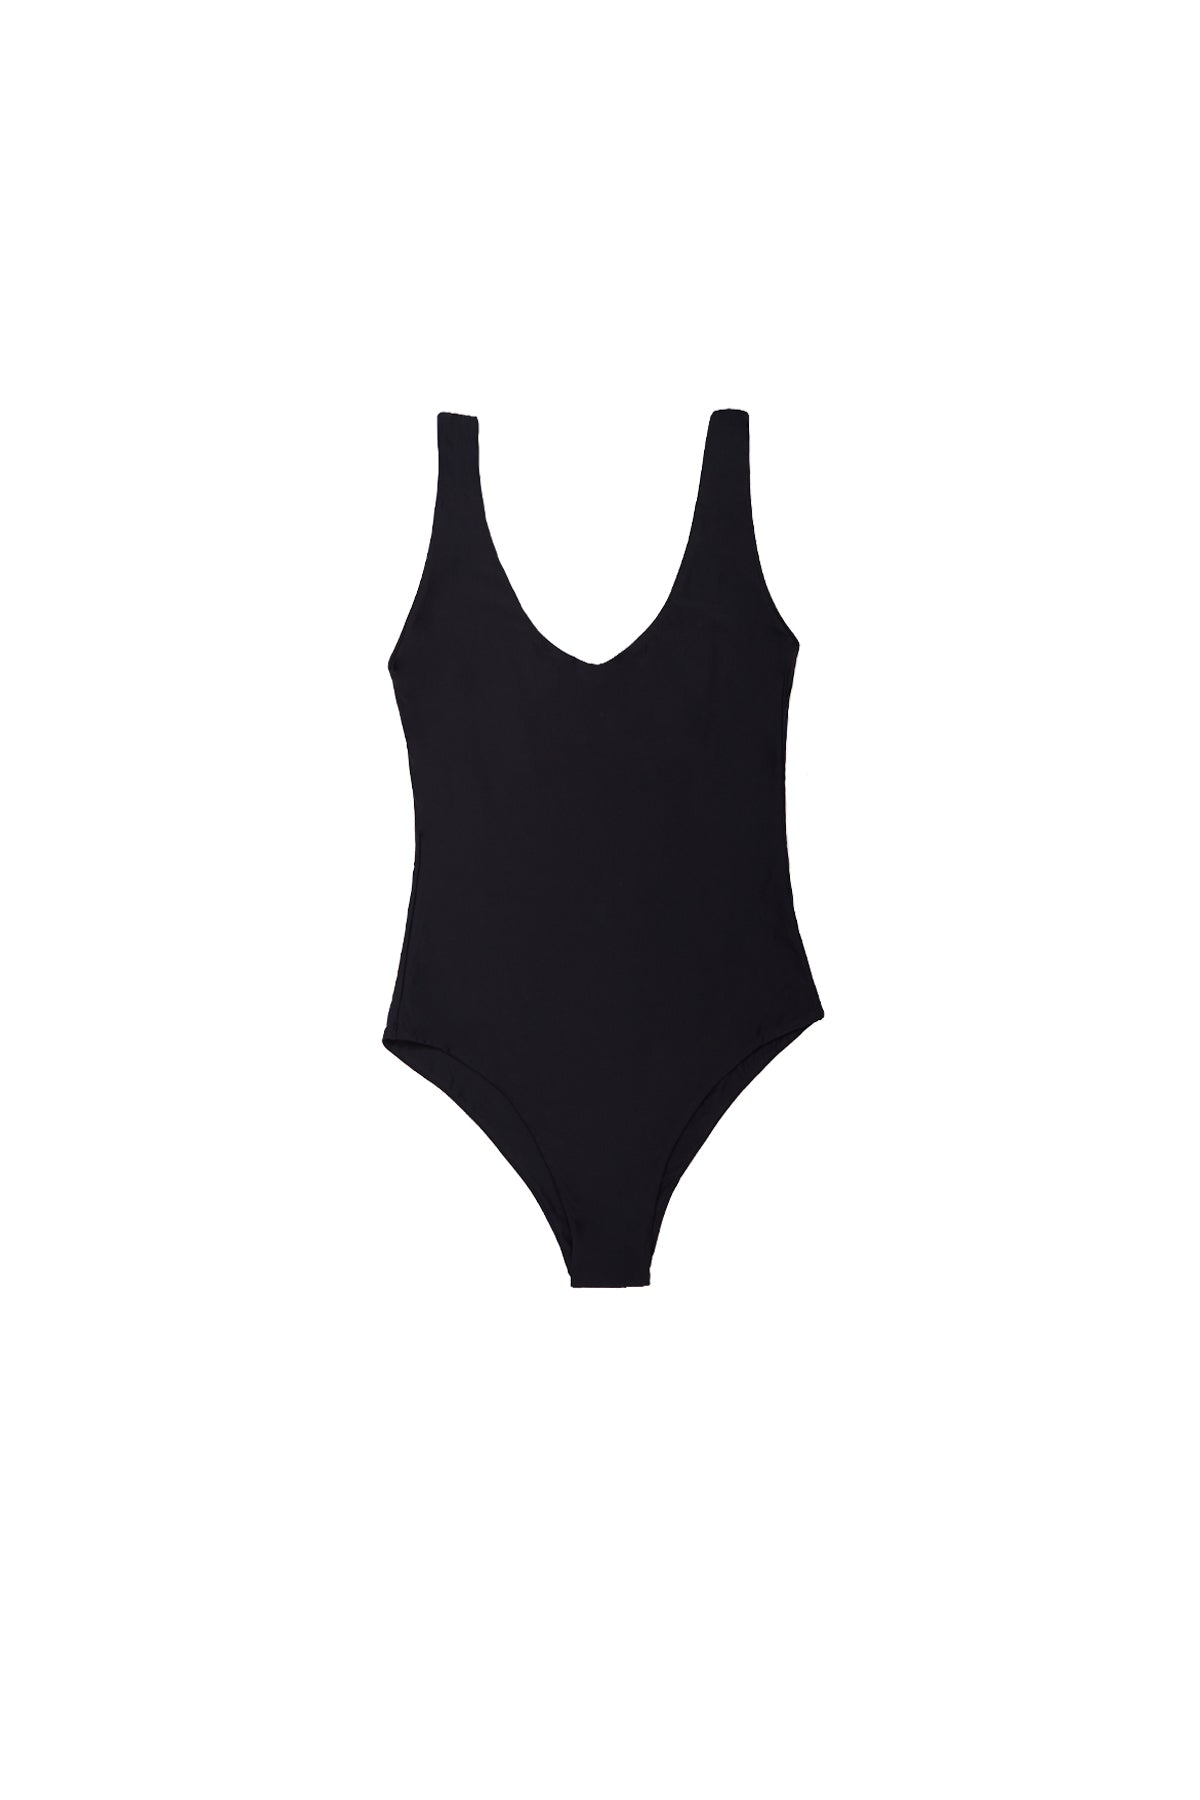 The Poolside One Piece Black